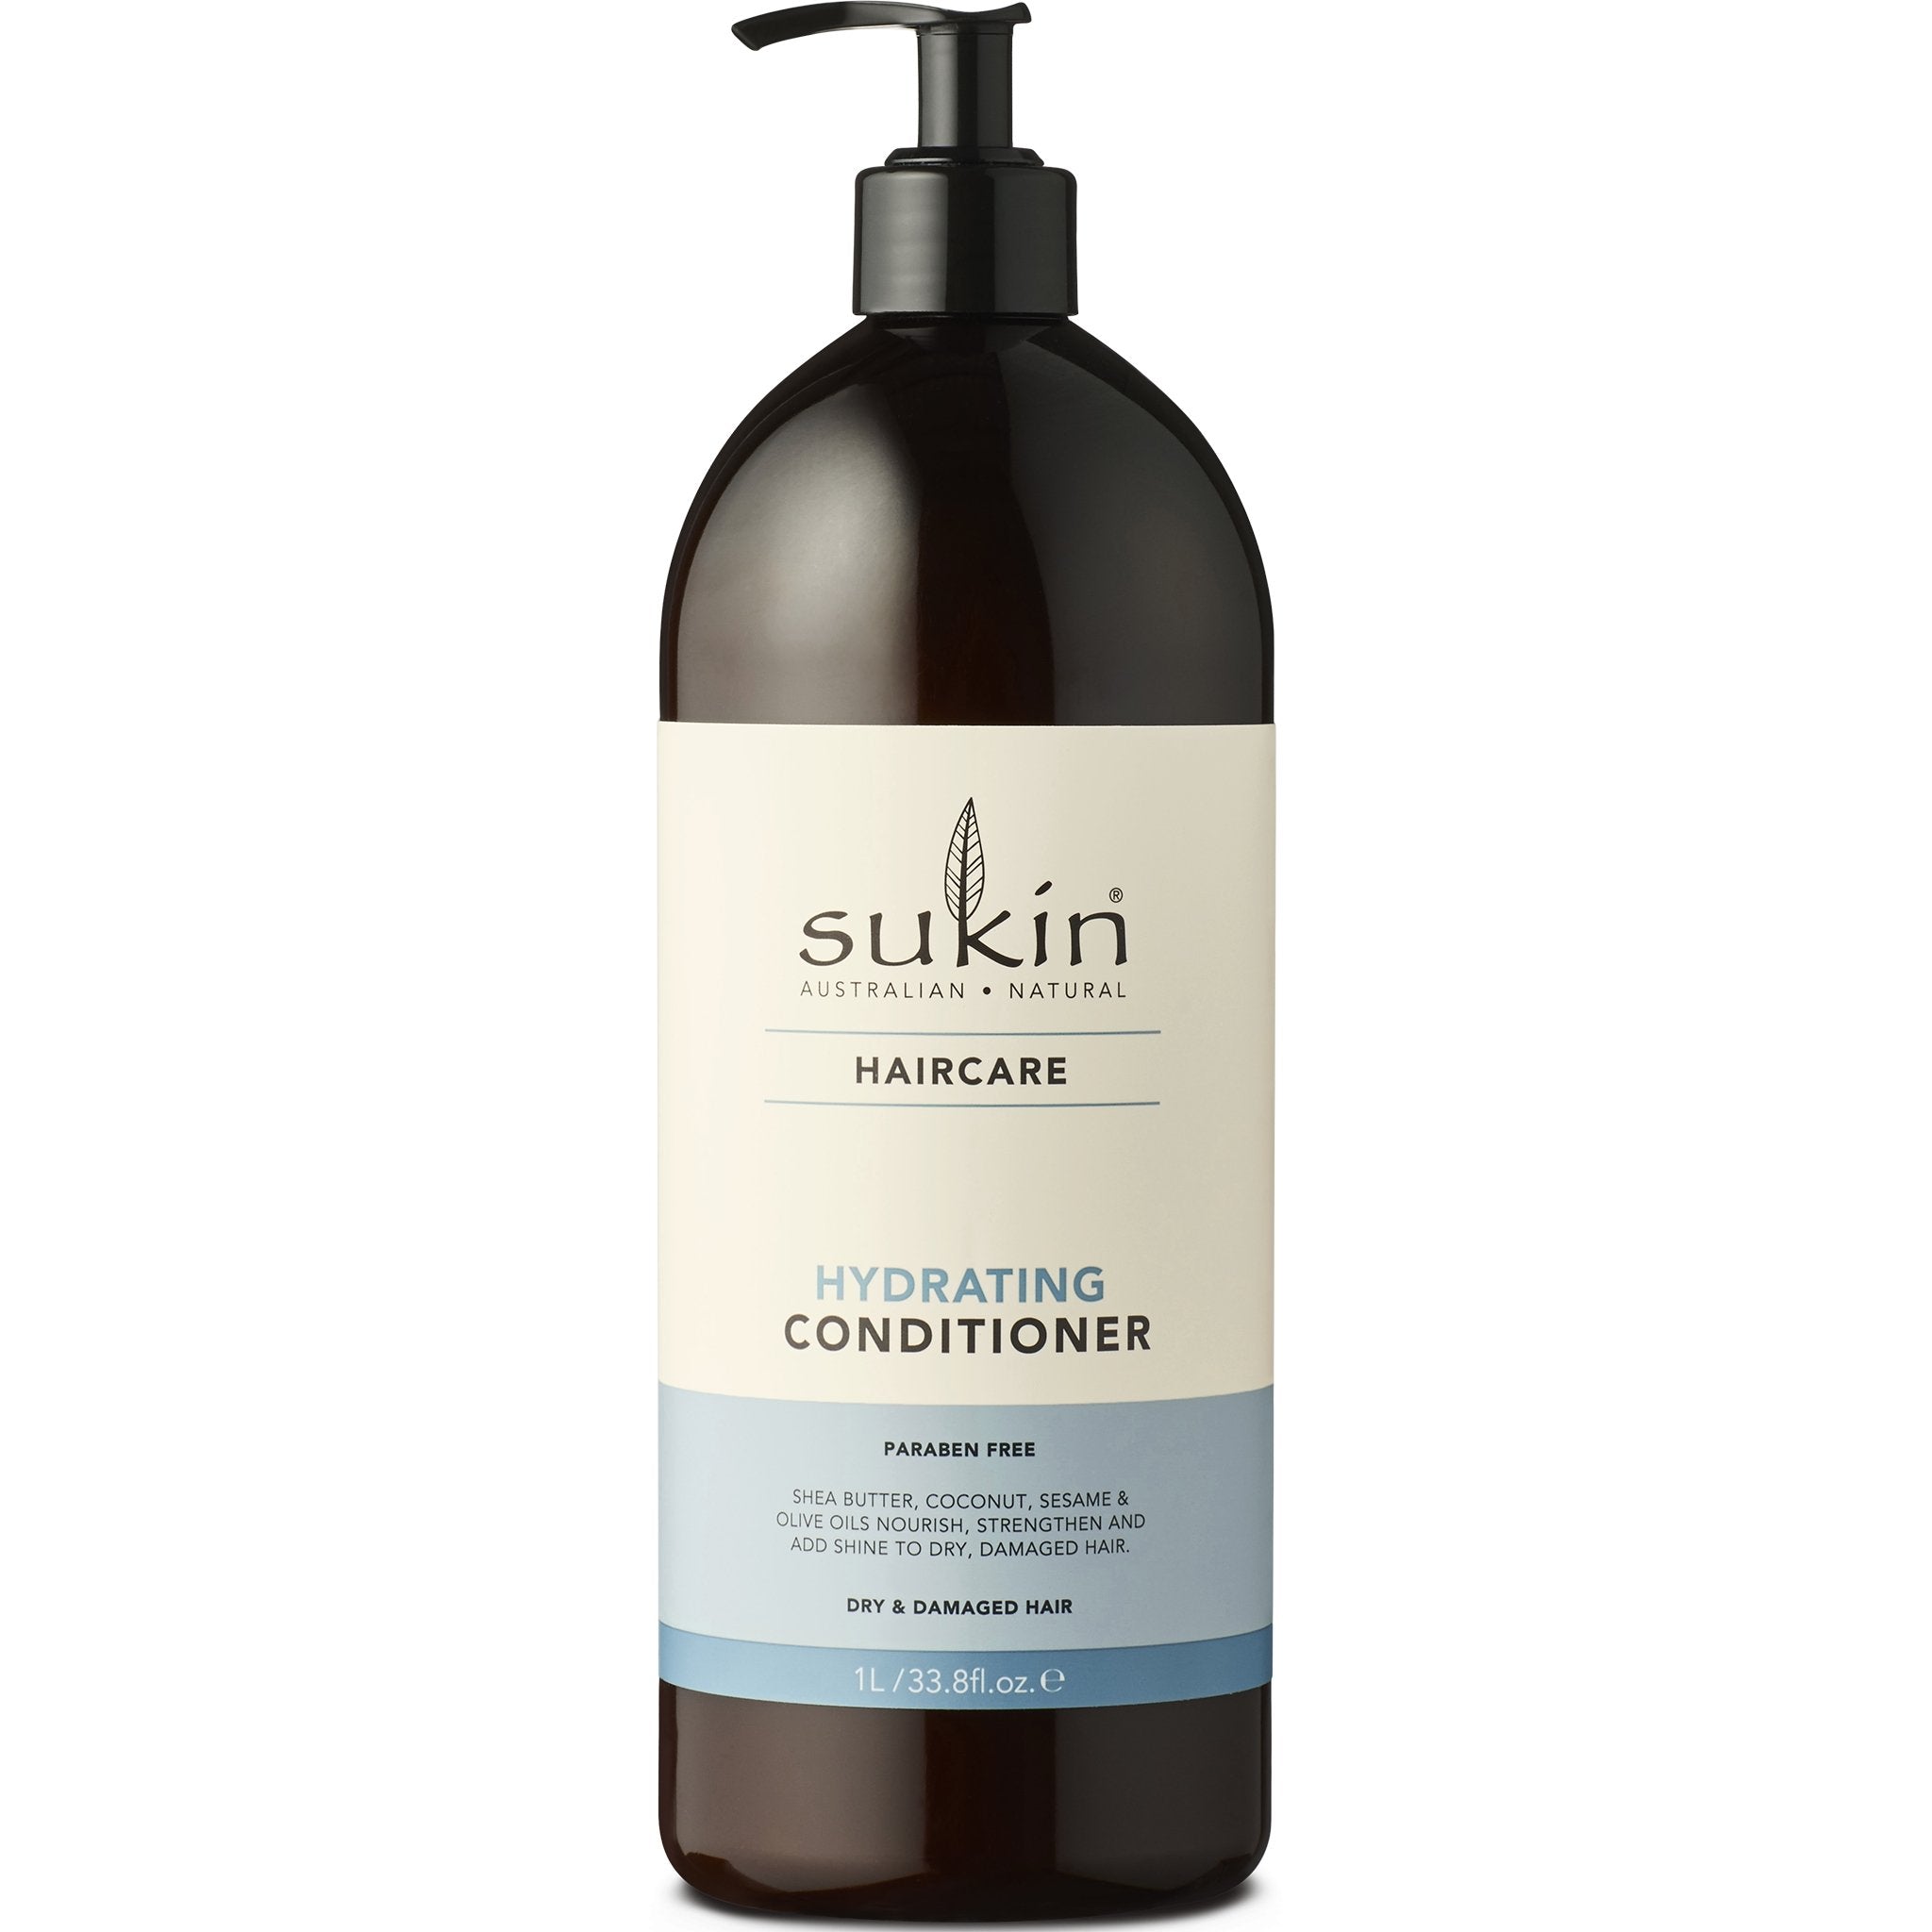 Hydrating Conditioner - mypure.co.uk